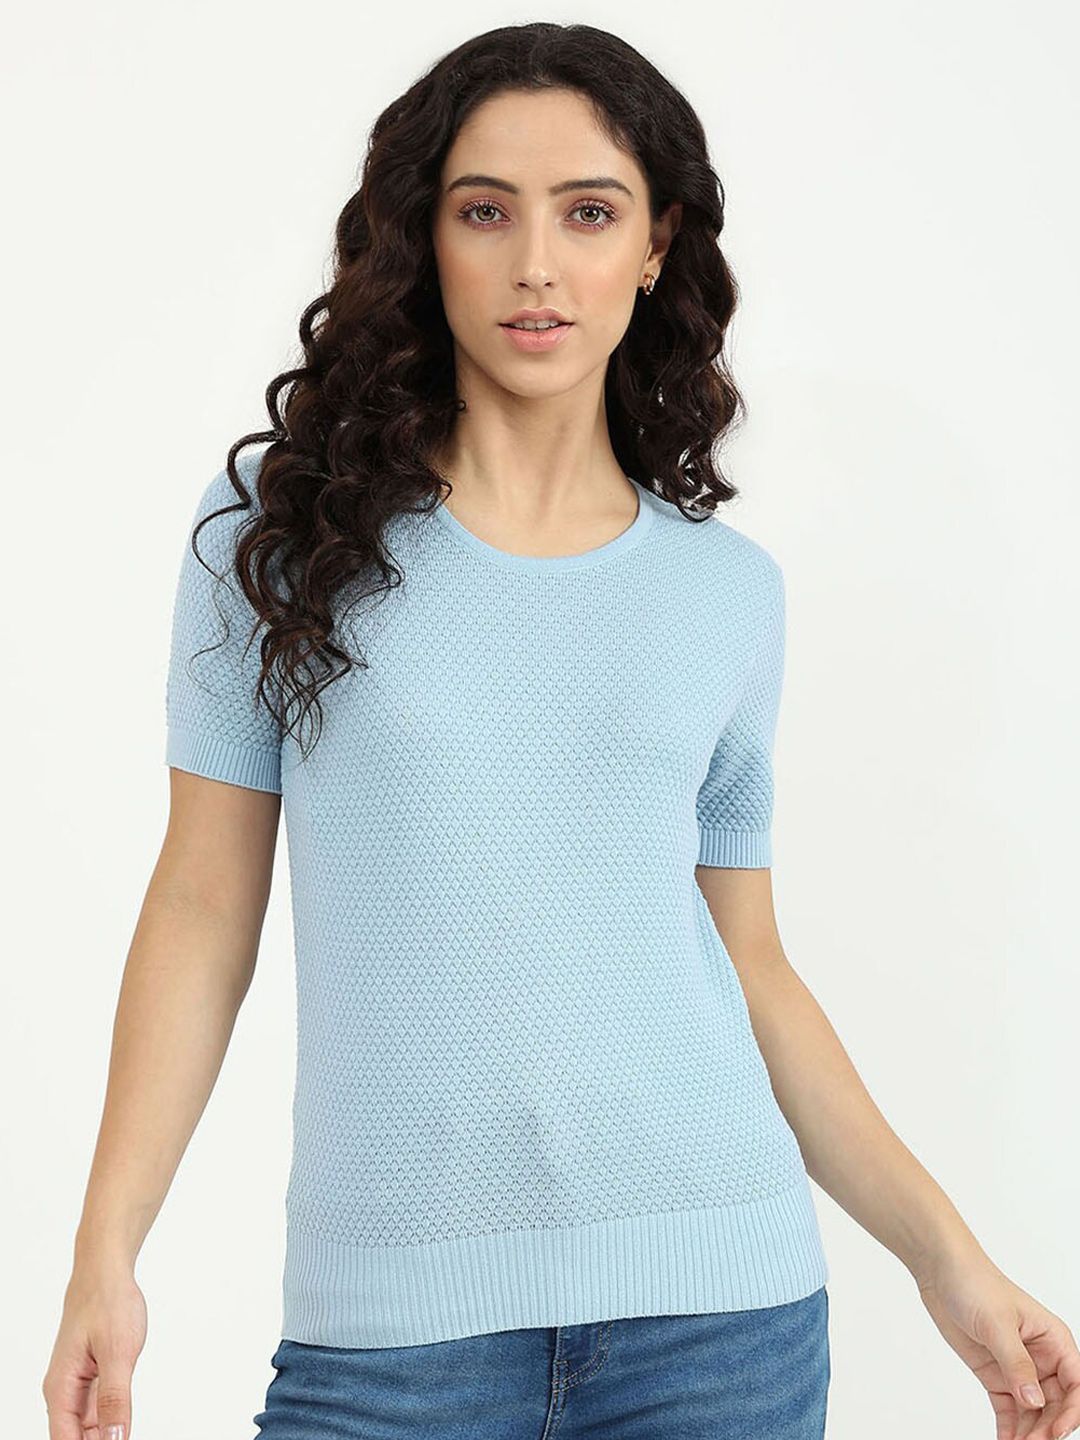 United Colors of Benetton Blue Textured Slim Fit Top Price in India